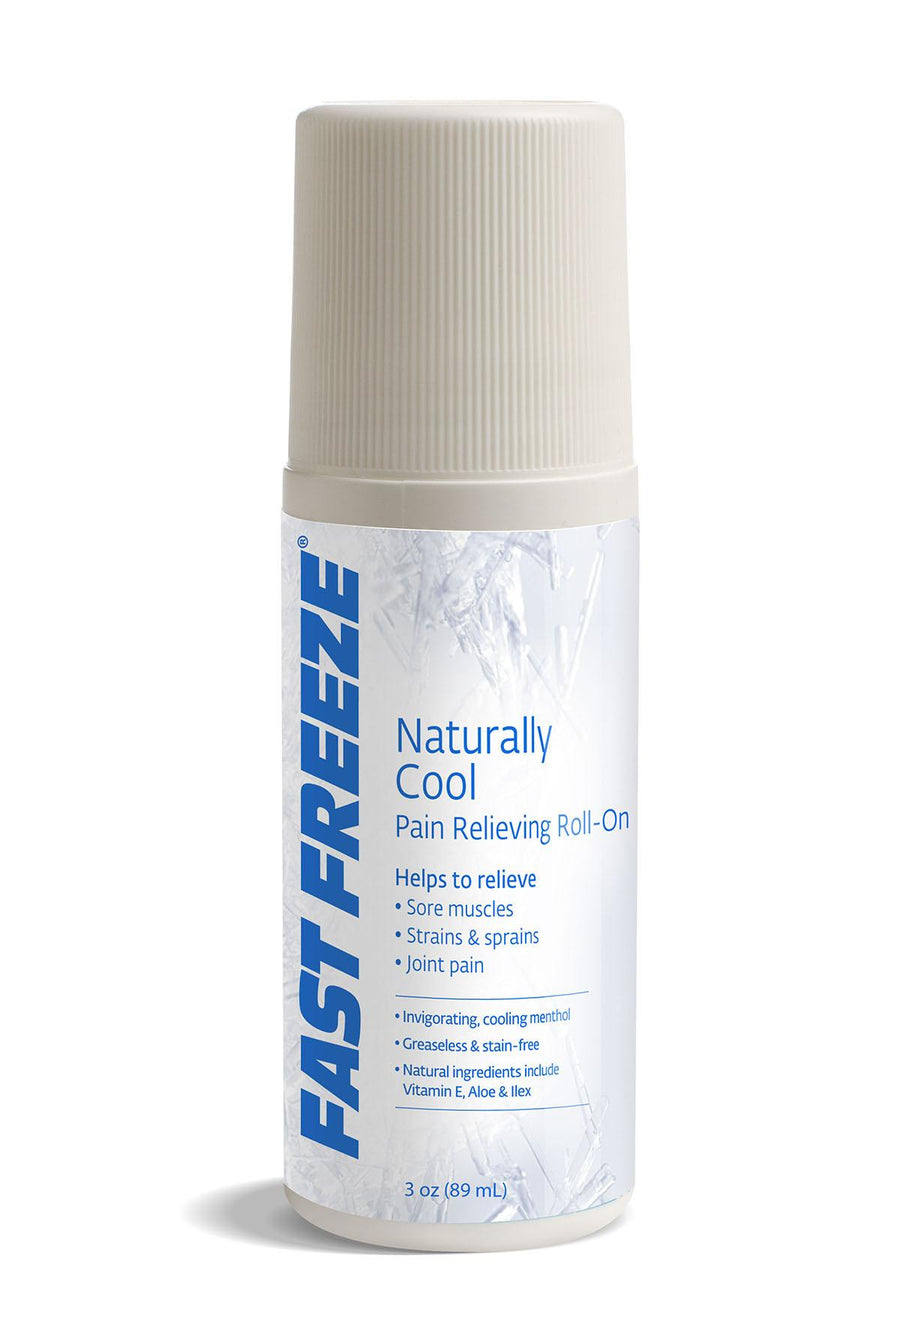 Fast Freeze Cold Therapy Pain Relief Gel,3.000 OZ, Each